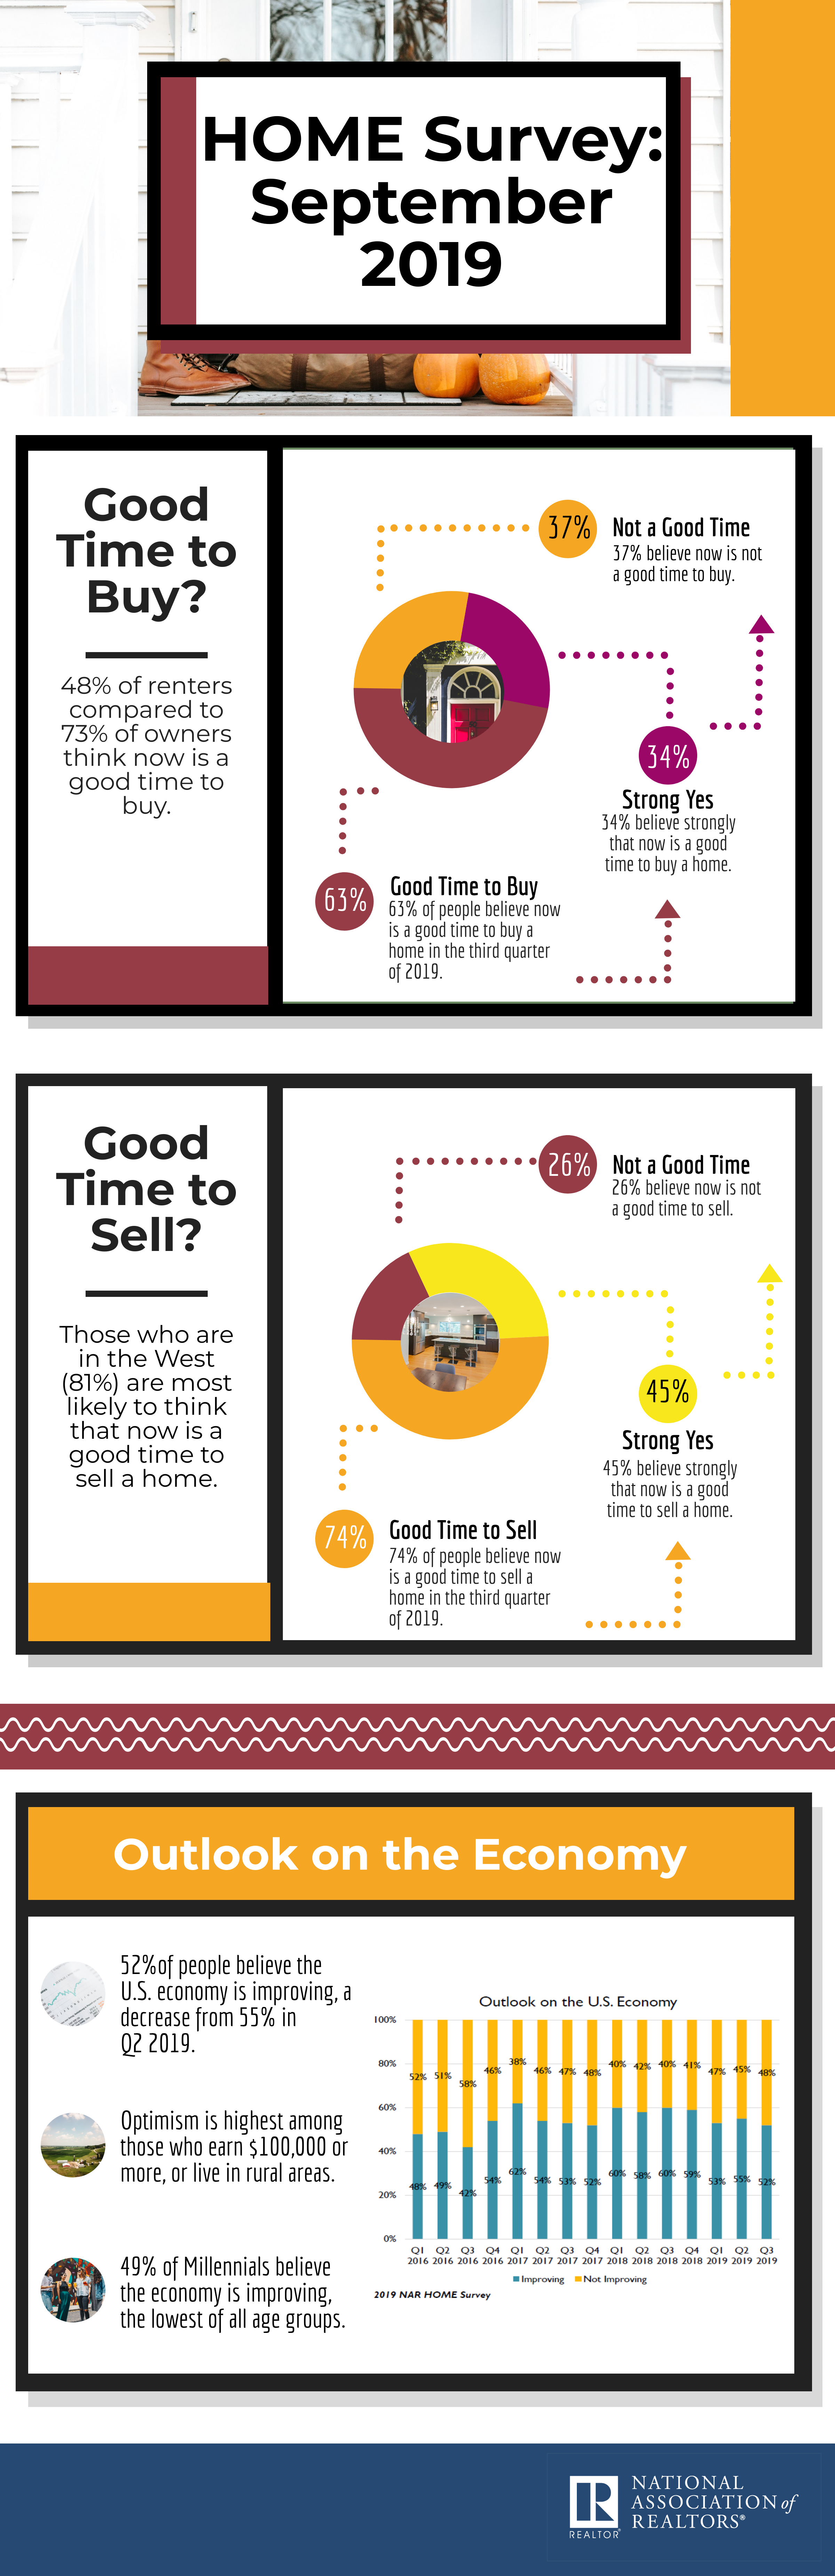 A new survey released by the National Association of Realtors (NAR) found more than half of Americans believe that now is a good time to buy or sell a home